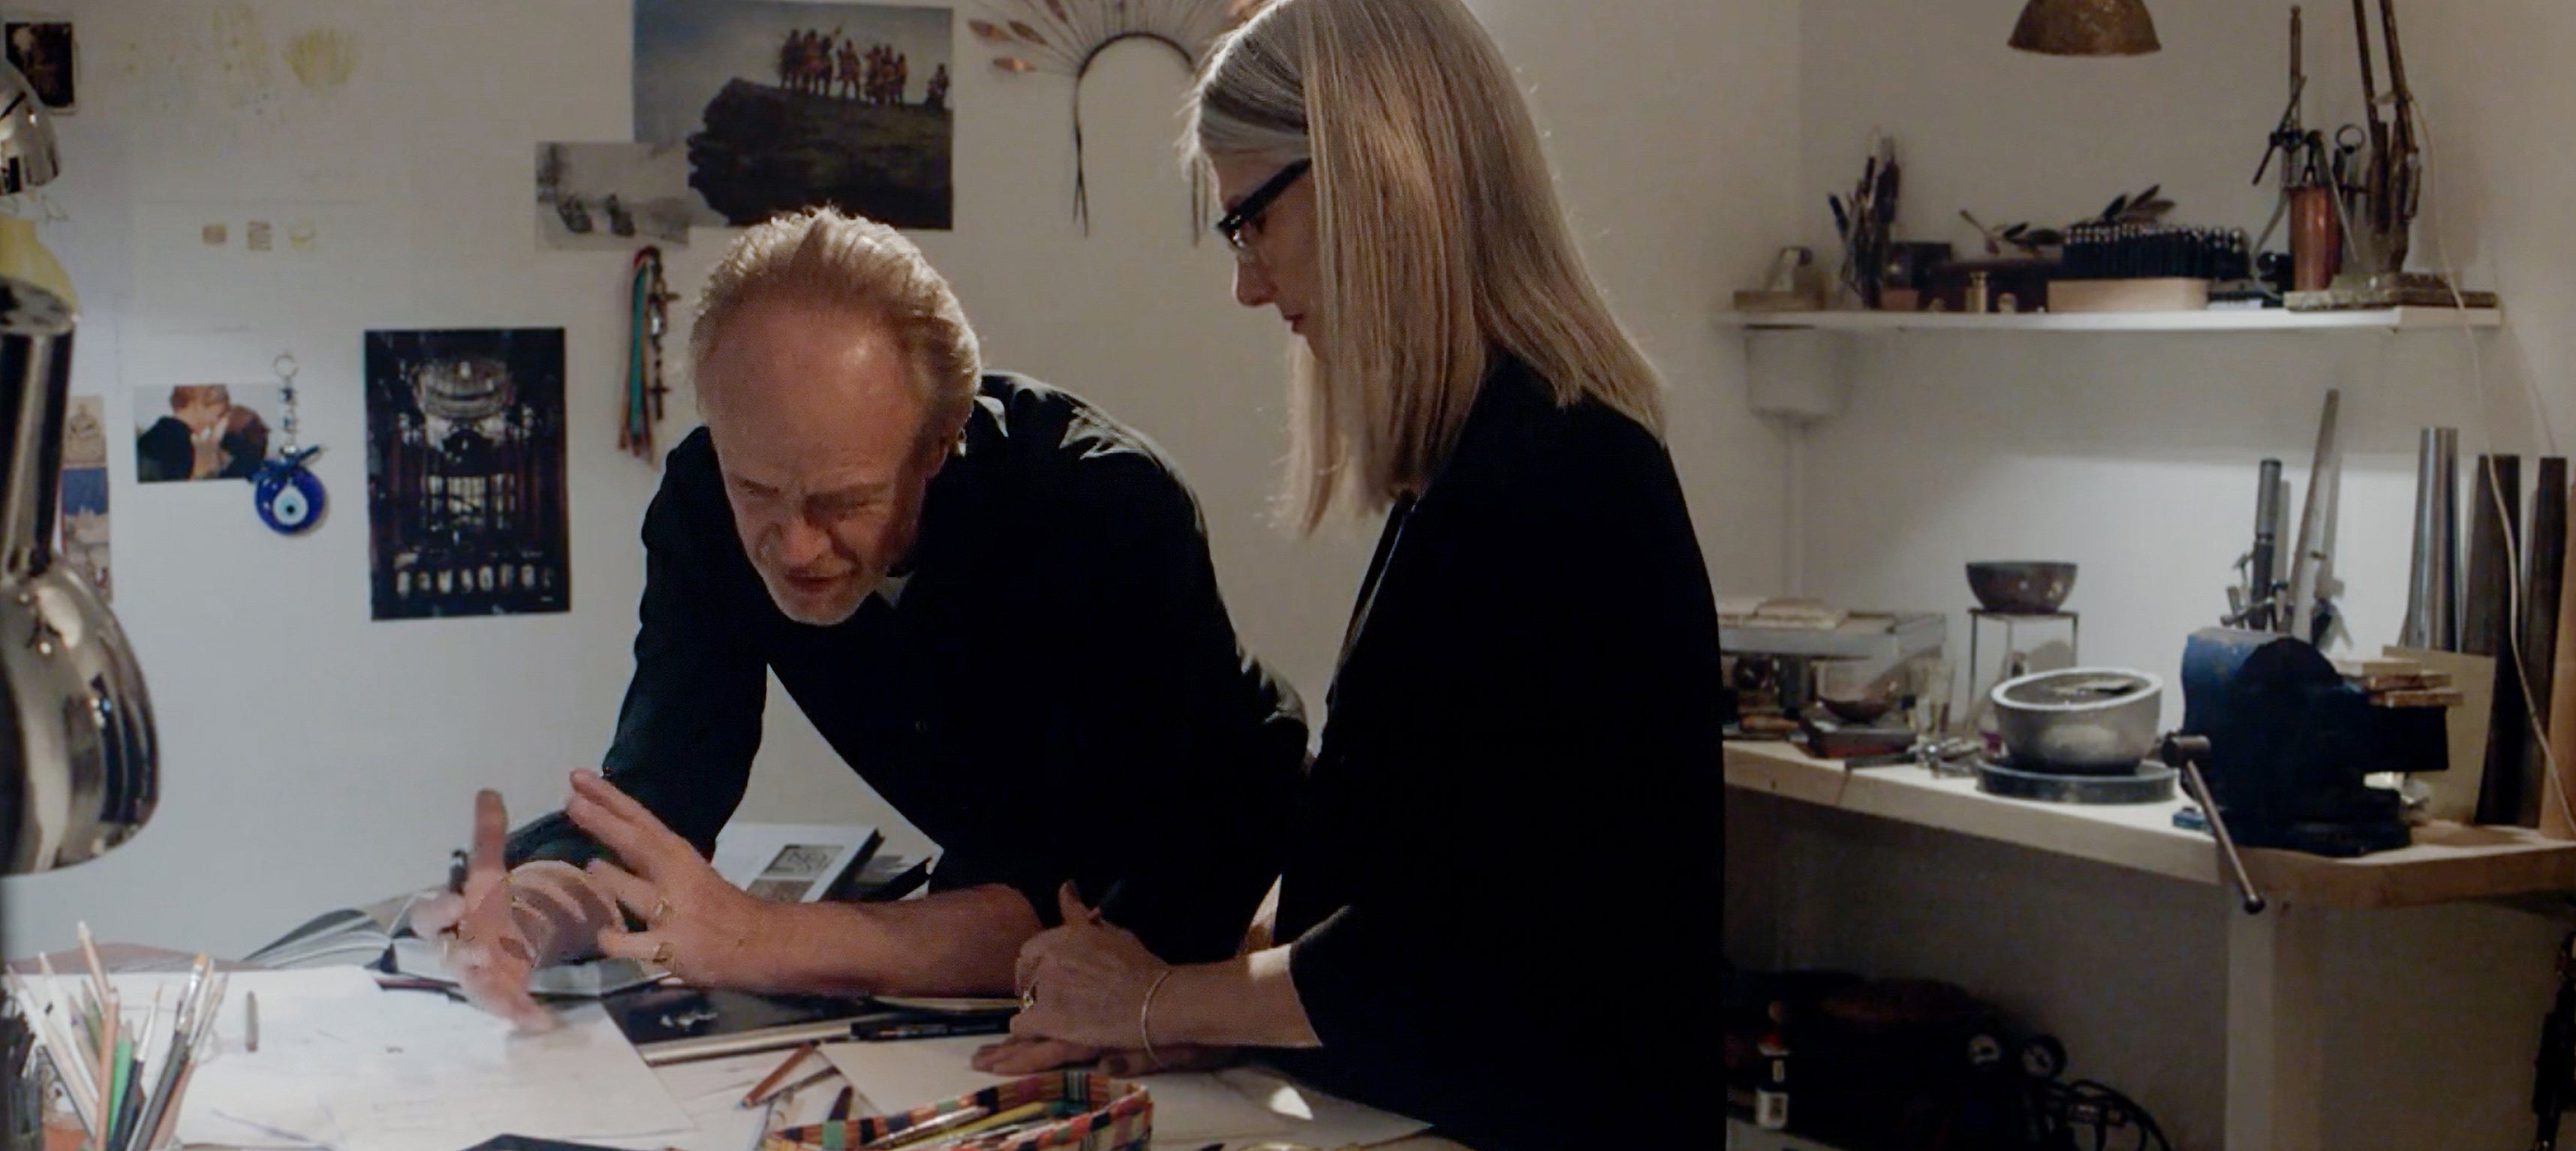 Gary & Sheila discussing a project in their studio.